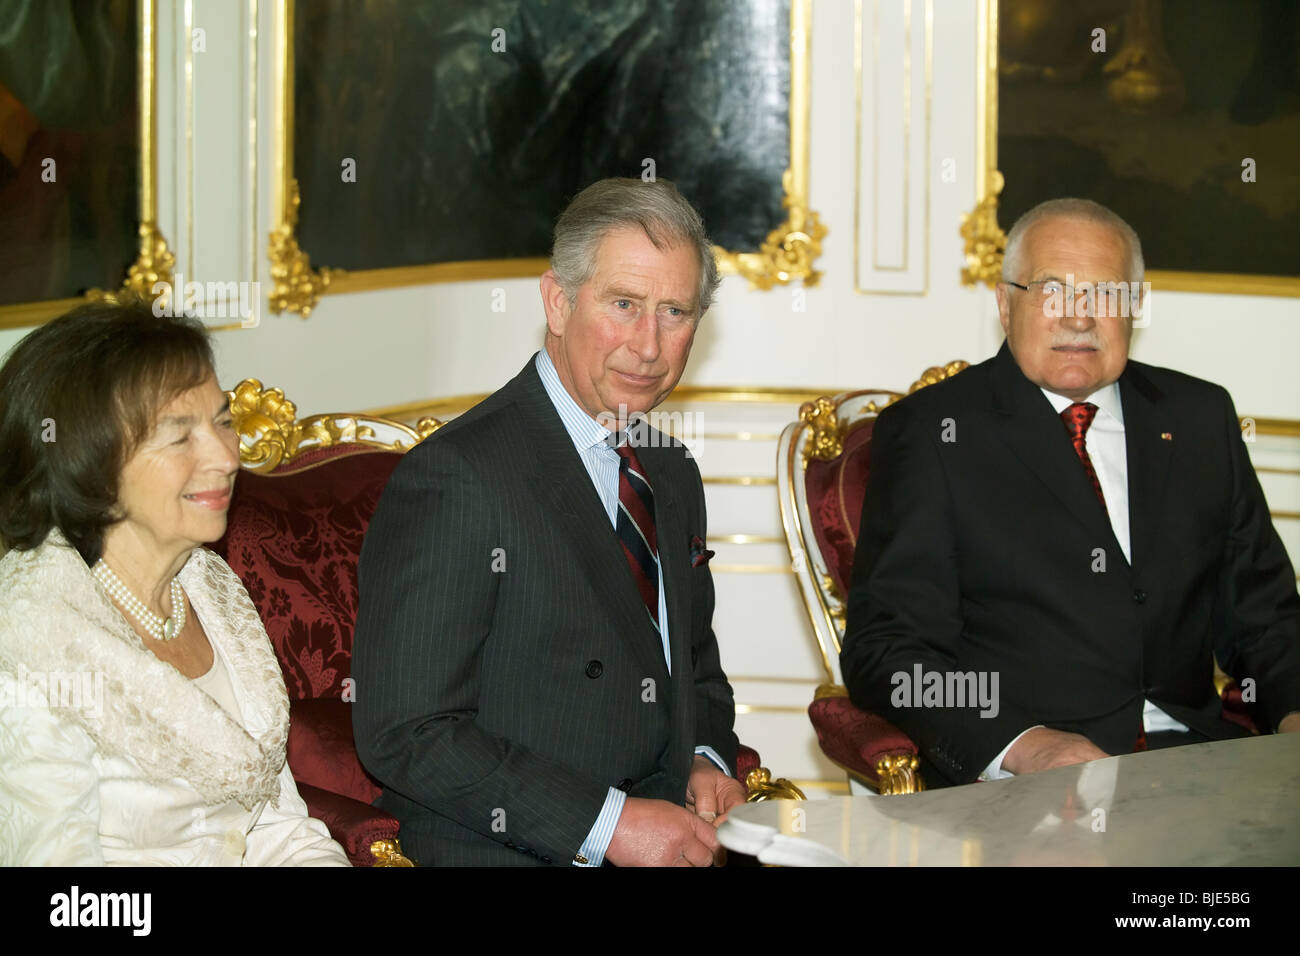 Britain's Prince Charles and his wife Camilla, the Duchess of Cornwall, visit Prague on 20 March 2010. Stock Photo